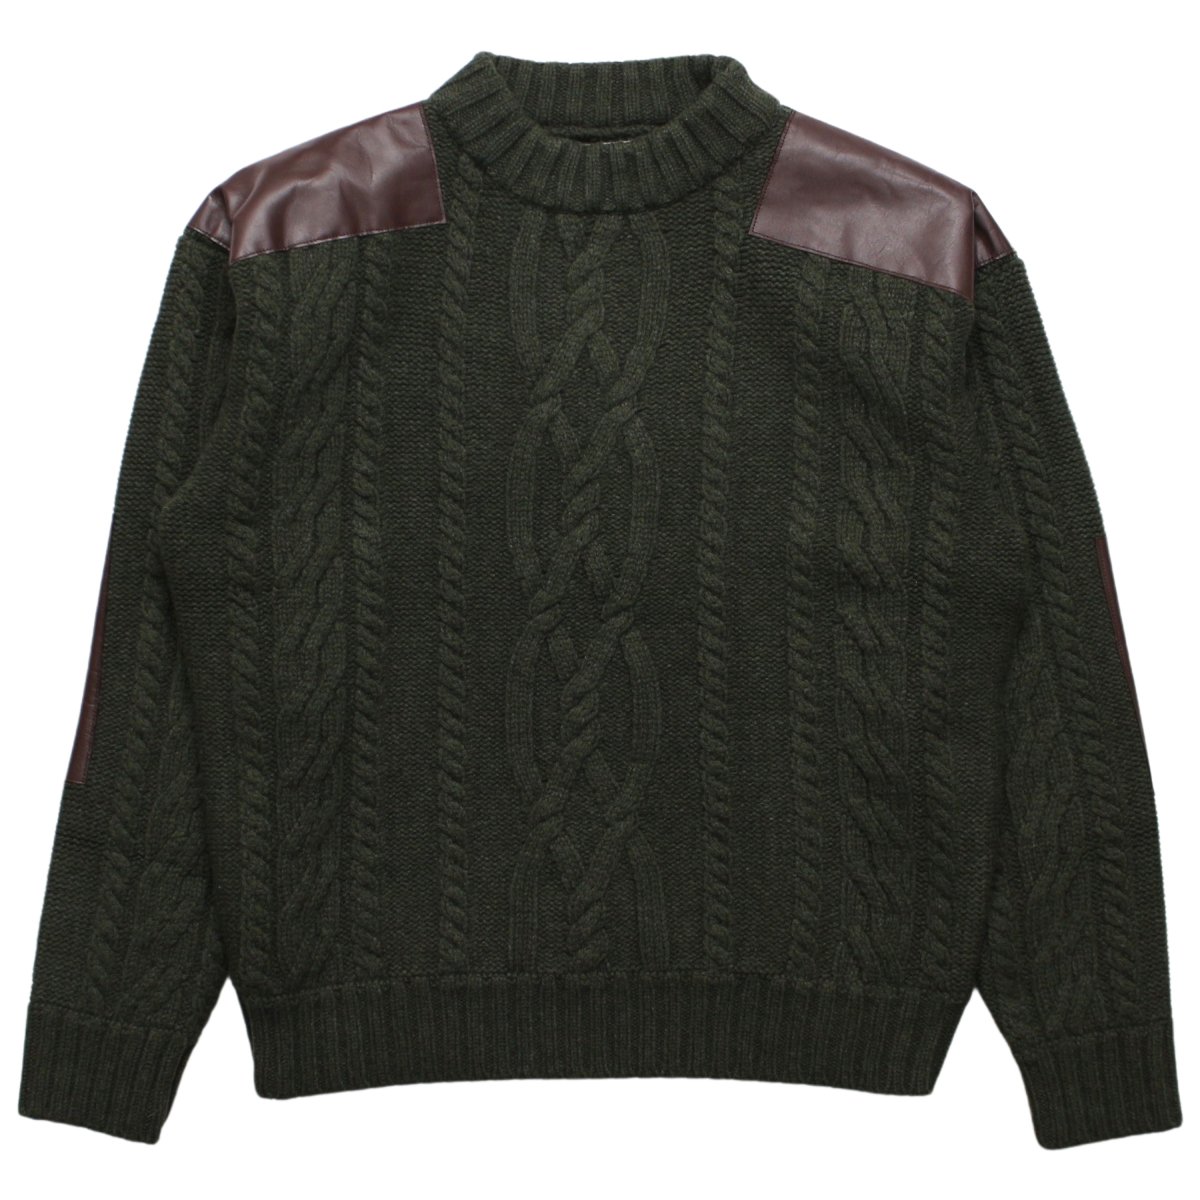 LEATHER PATCHED COMBAT KNIT